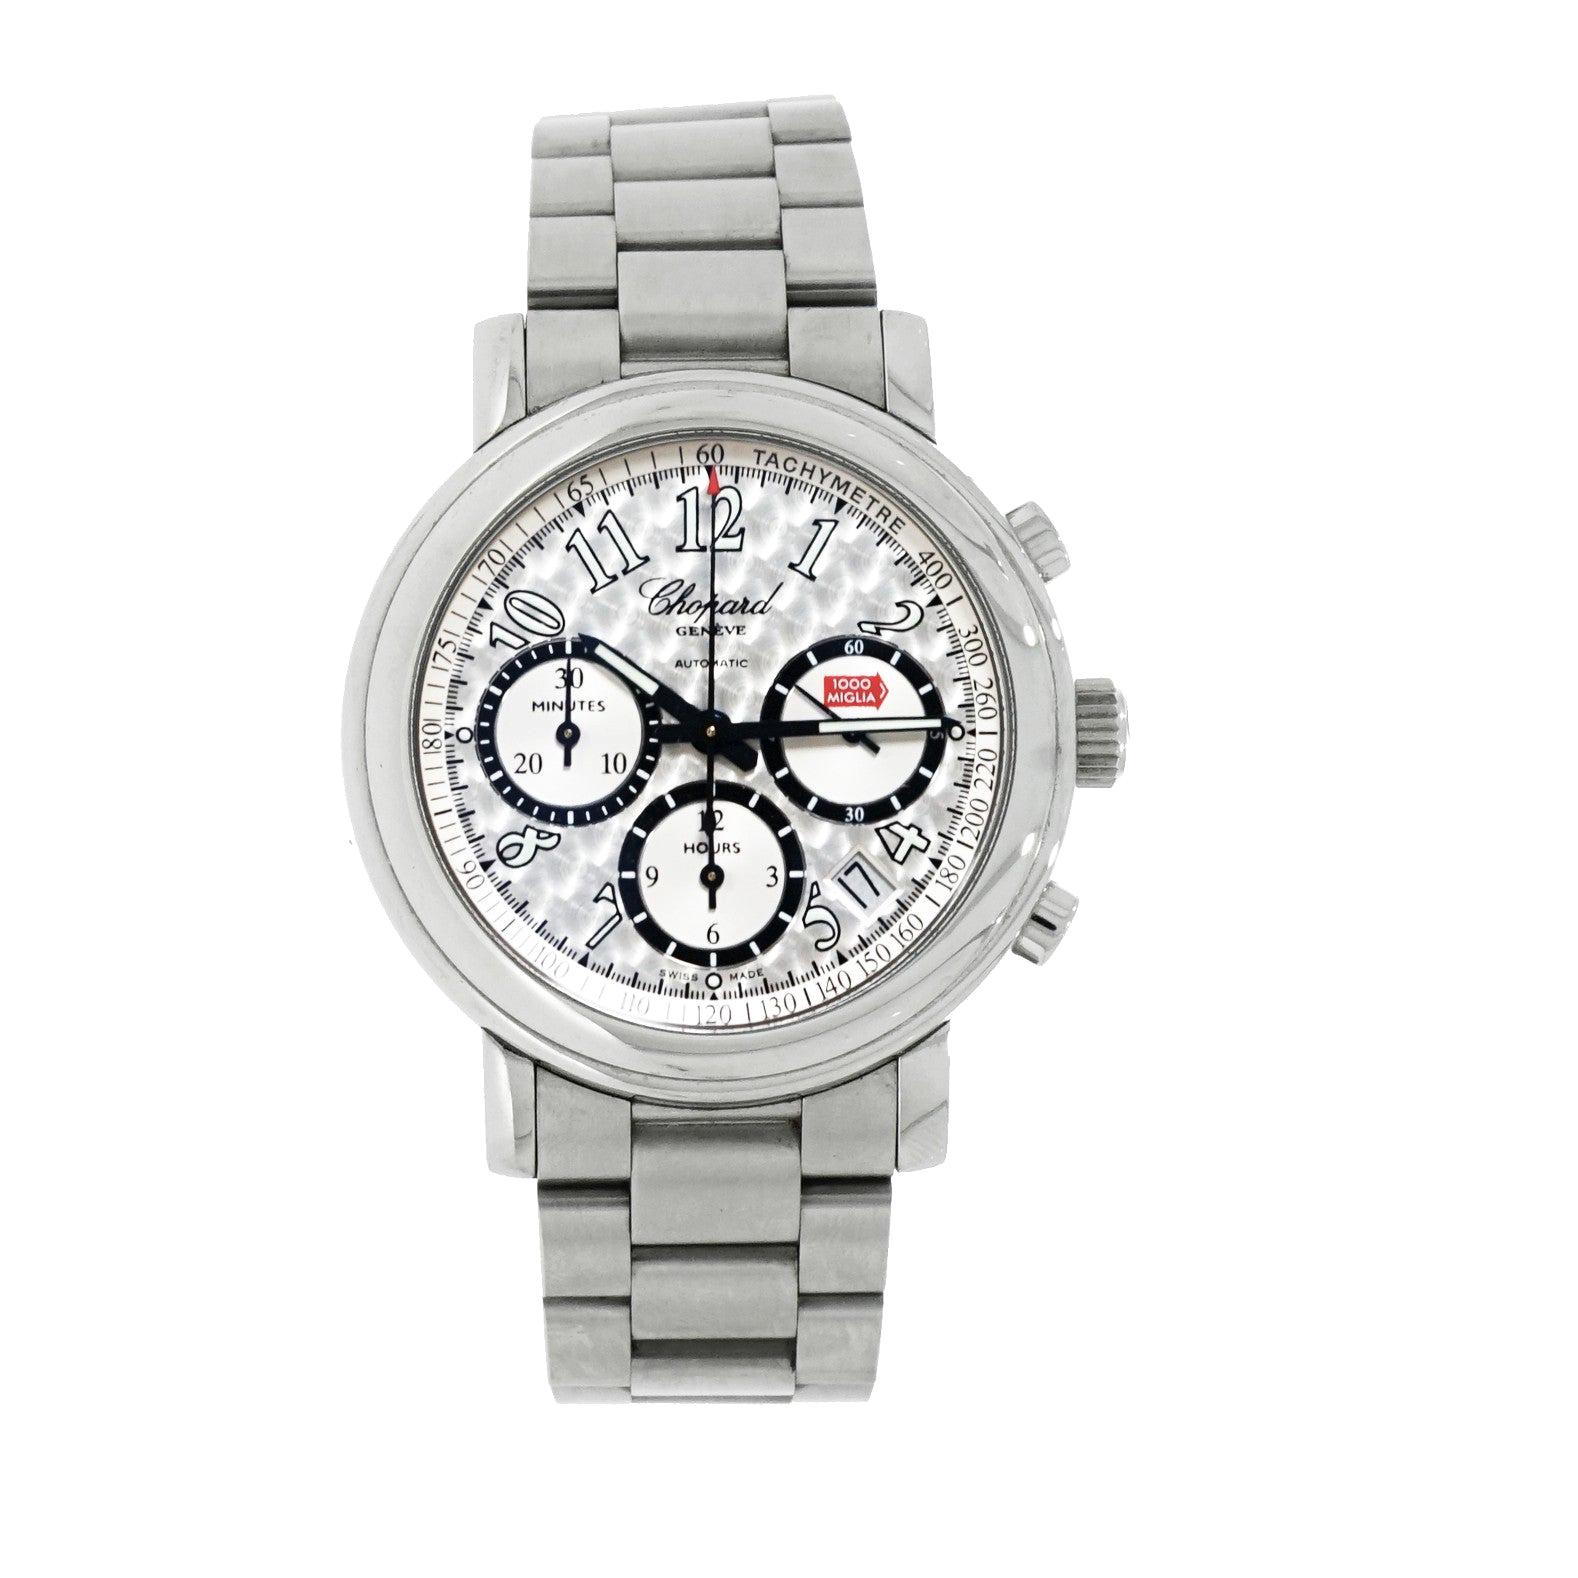 Chopard Mille Miglia Chronograph in Stainless Steel